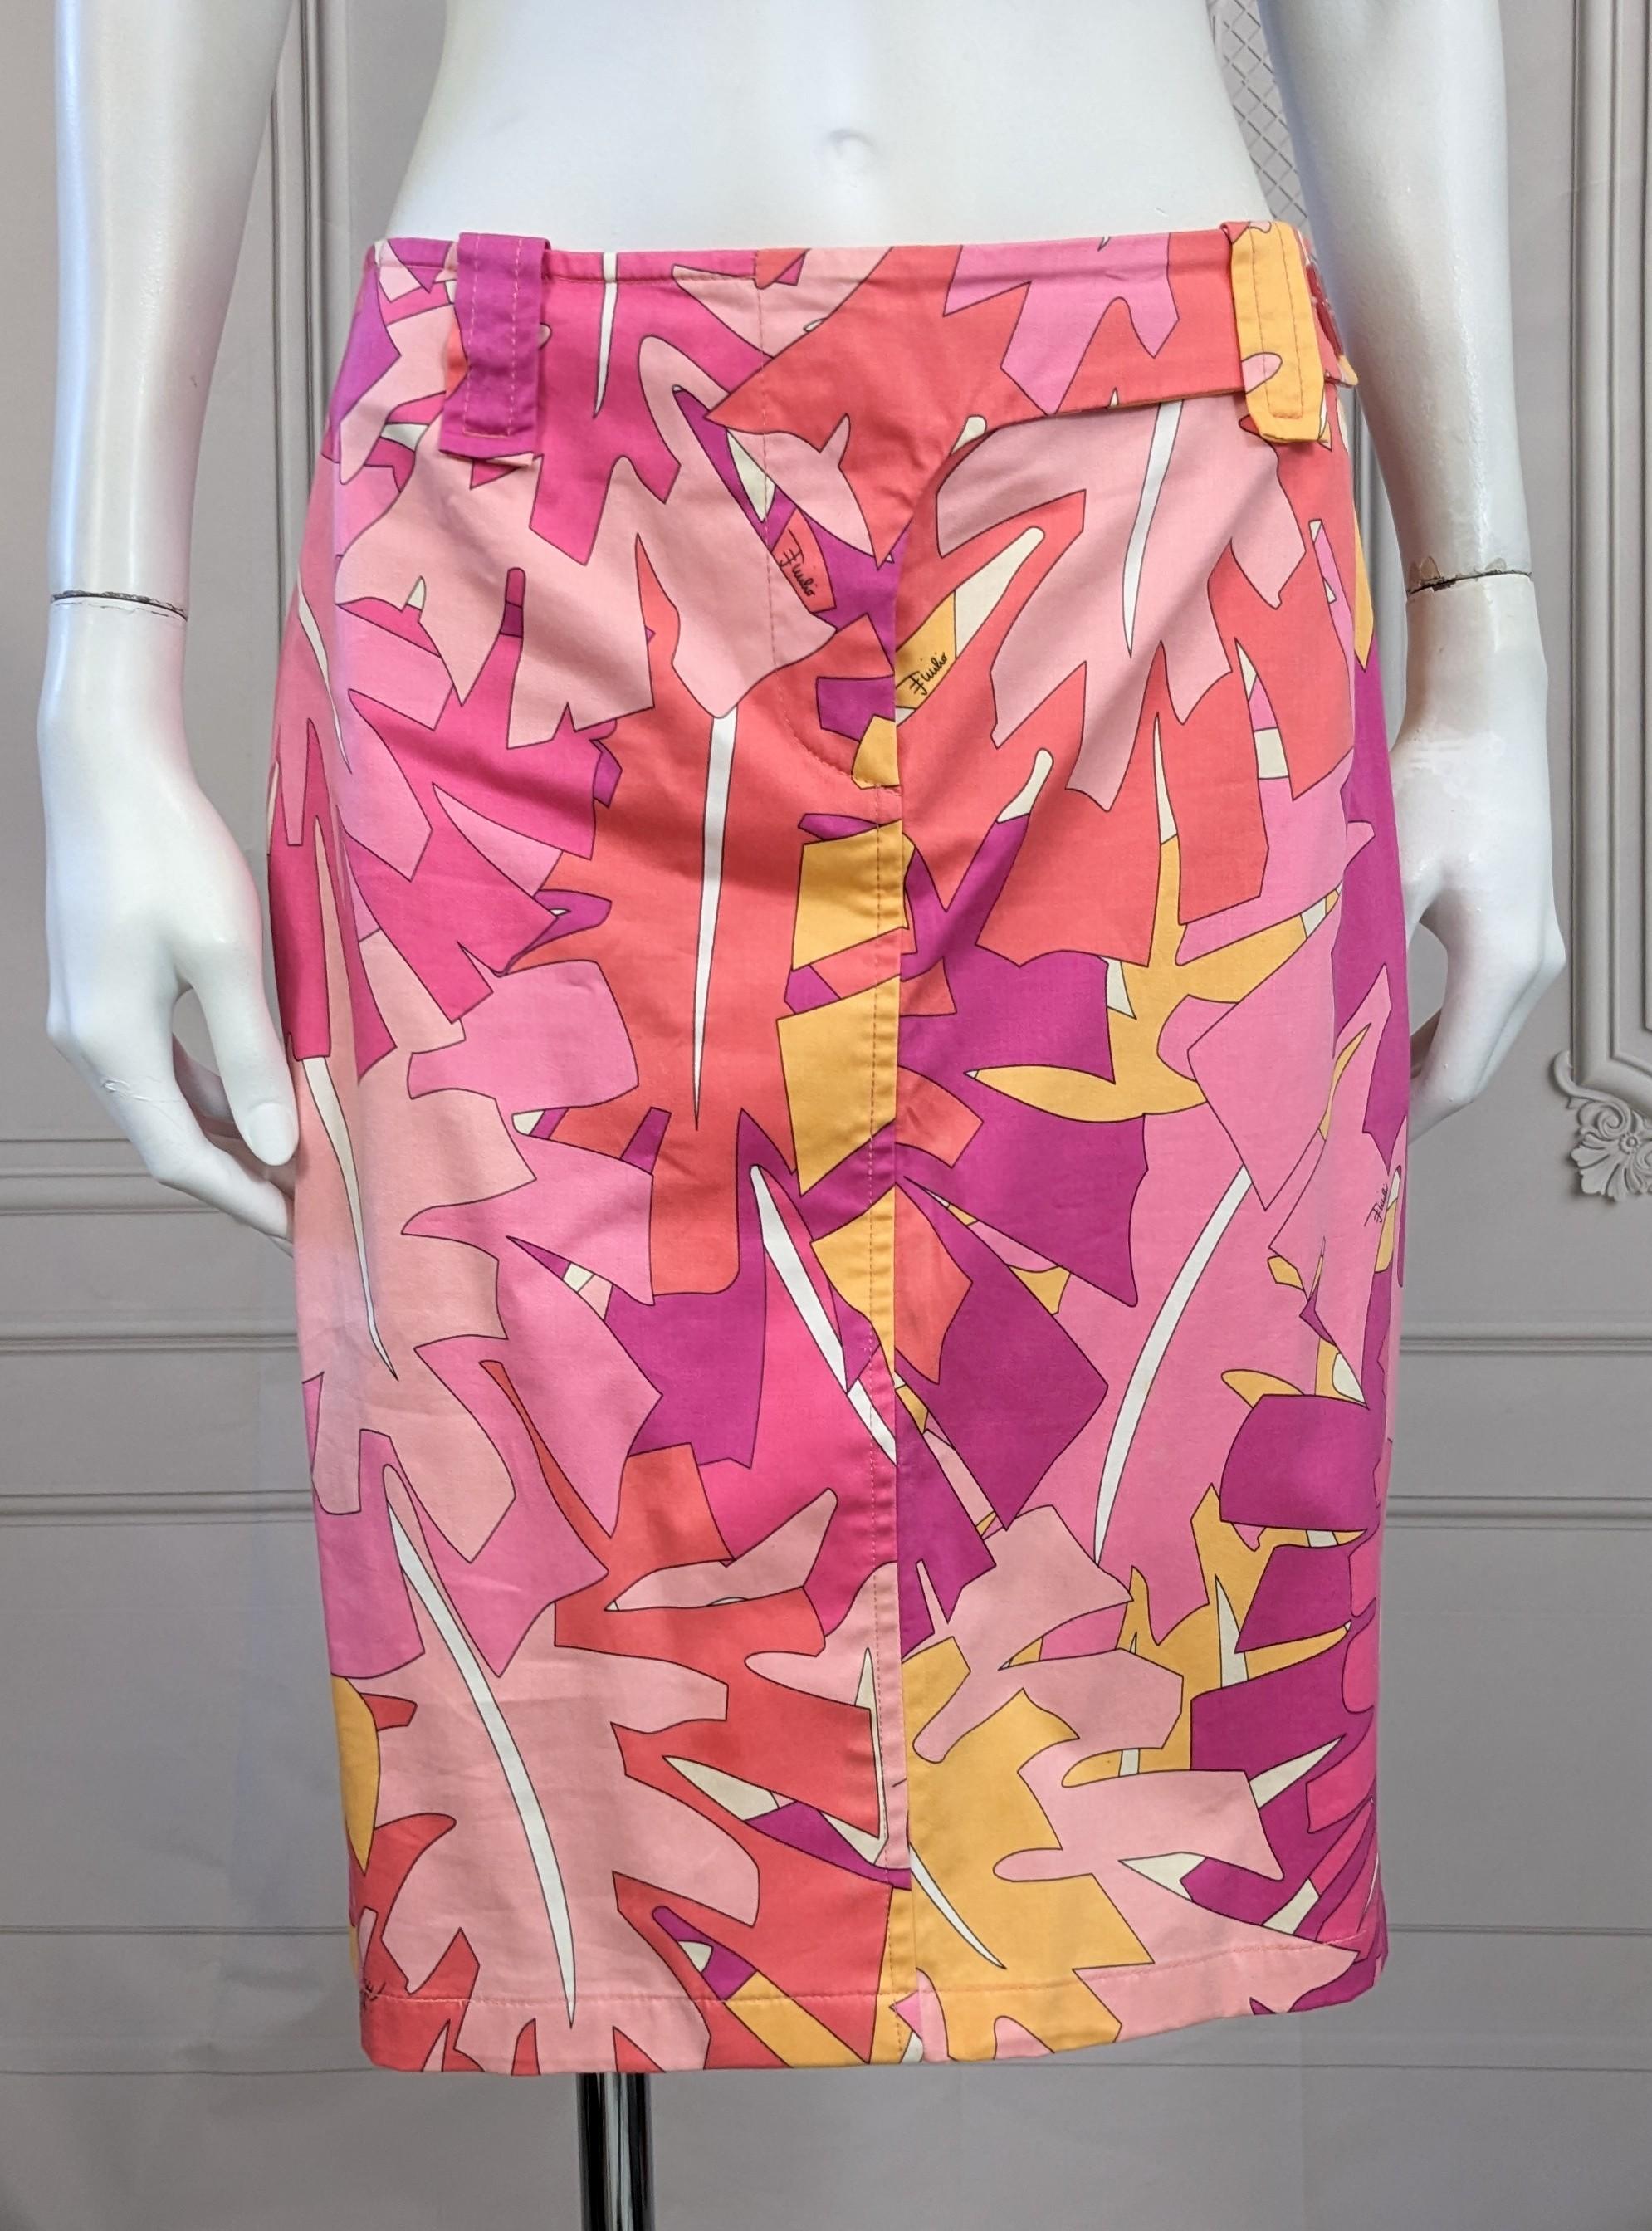 Emilio Pucci Leaf Print Skirt of lycra infused cotton poplin for stretch. Styled like a jean with zip front entry and side button closure. Sits on hips with great graphic pops of color. Size 6 US. 